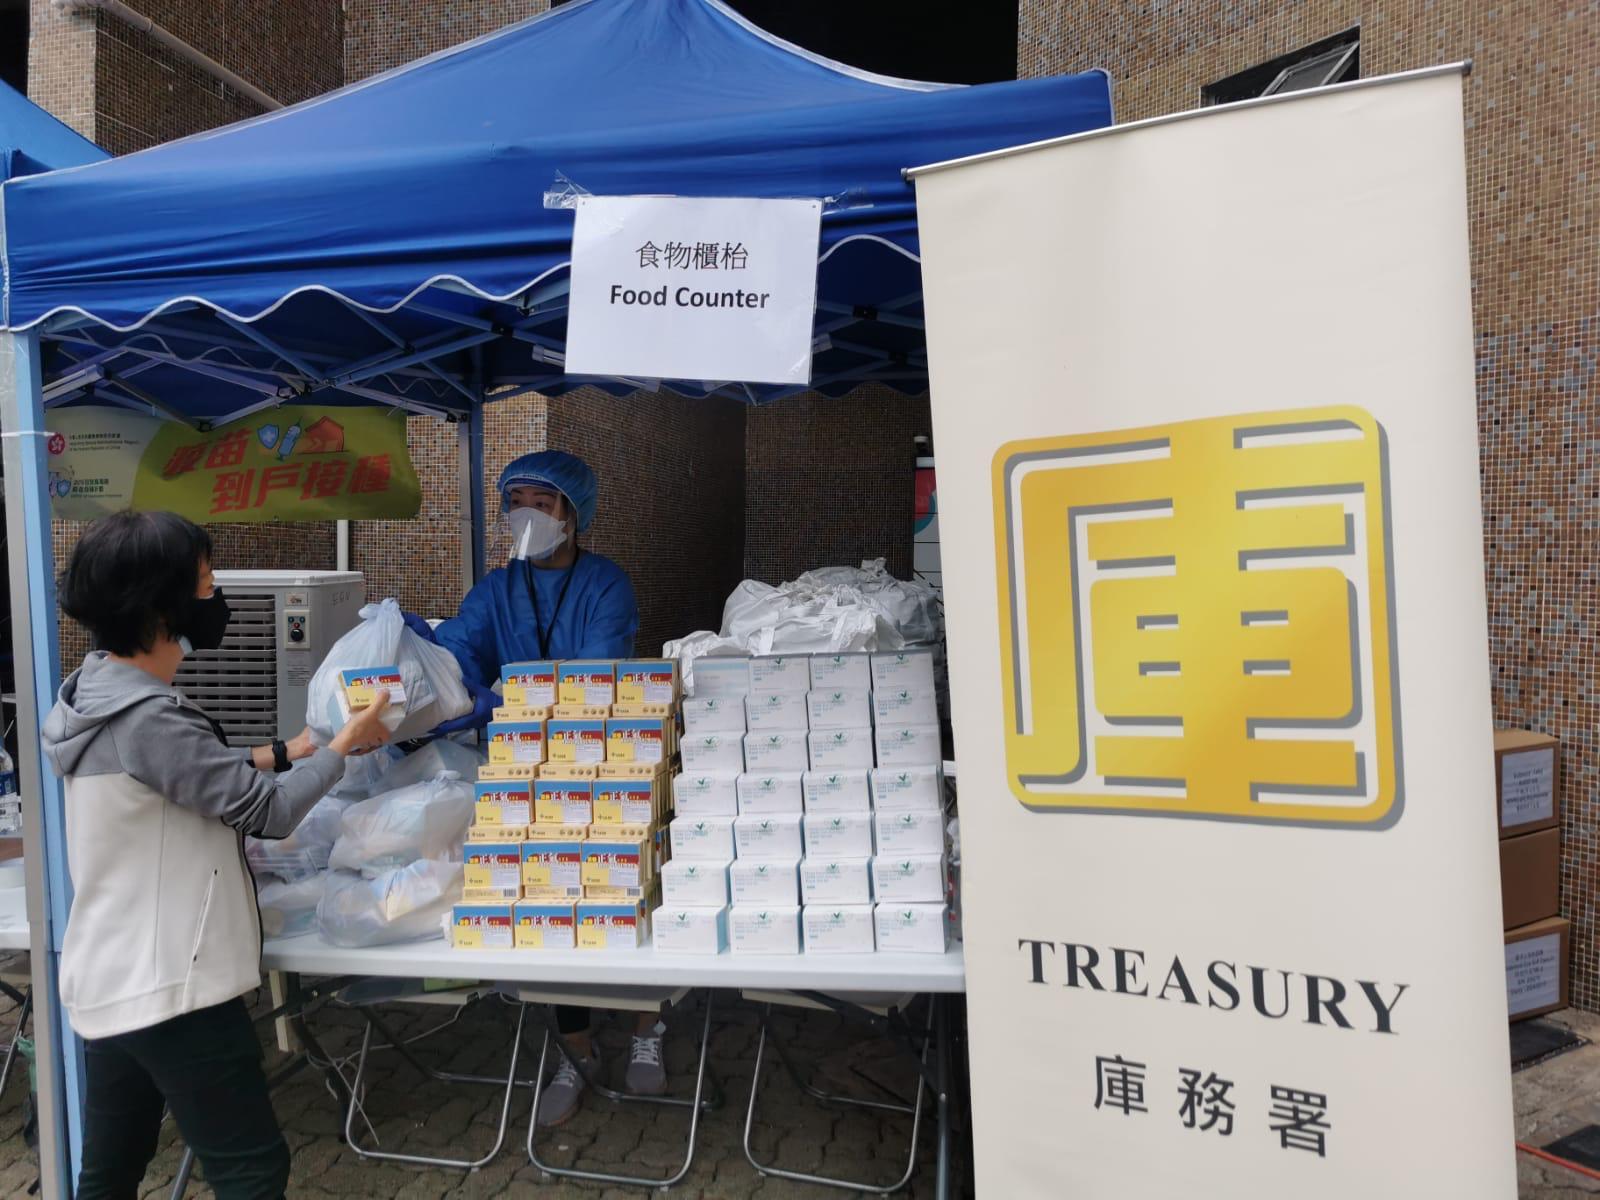 The Government yesterday (April 16) enforced "restriction-testing declaration" and compulsory testing notice in respect of the specified "restricted area" in Kwai Ming House, Kwai Hong Court, Kwai Chung. Photo shows staff members distributing food packs, rapid antigen test kits and anti-epidemic proprietary Chinese medicines donated by the Central Government to persons subject to compulsory testing in the "restricted area".